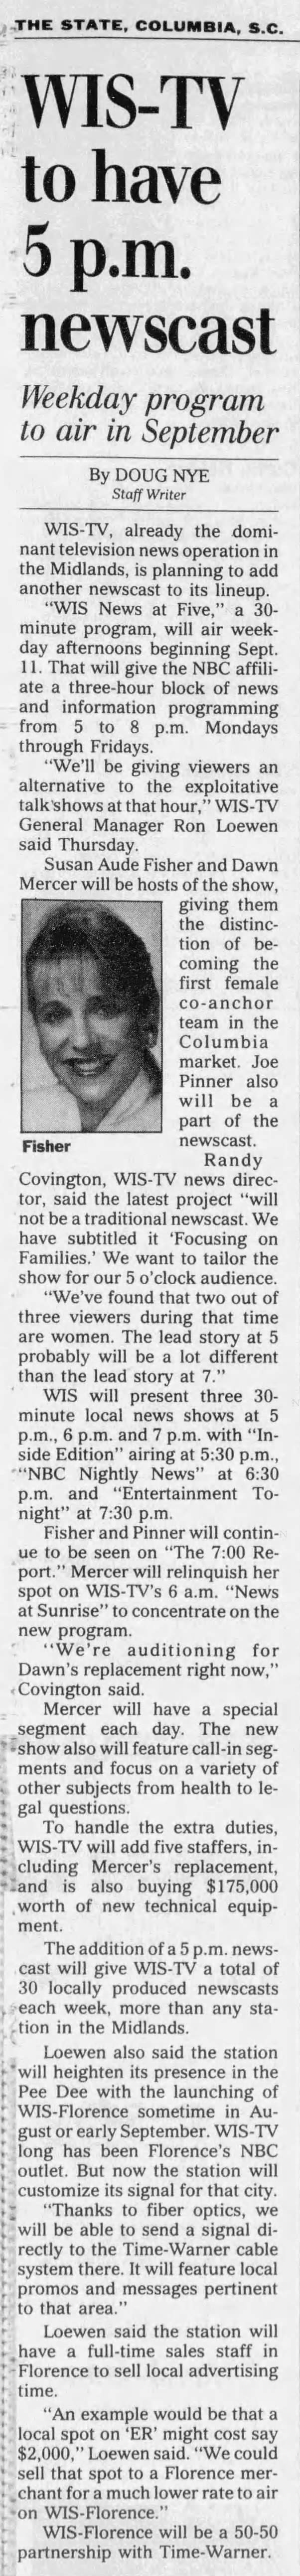 WIS-TV to have 5 p.m. newscast: Weekday program to air in September